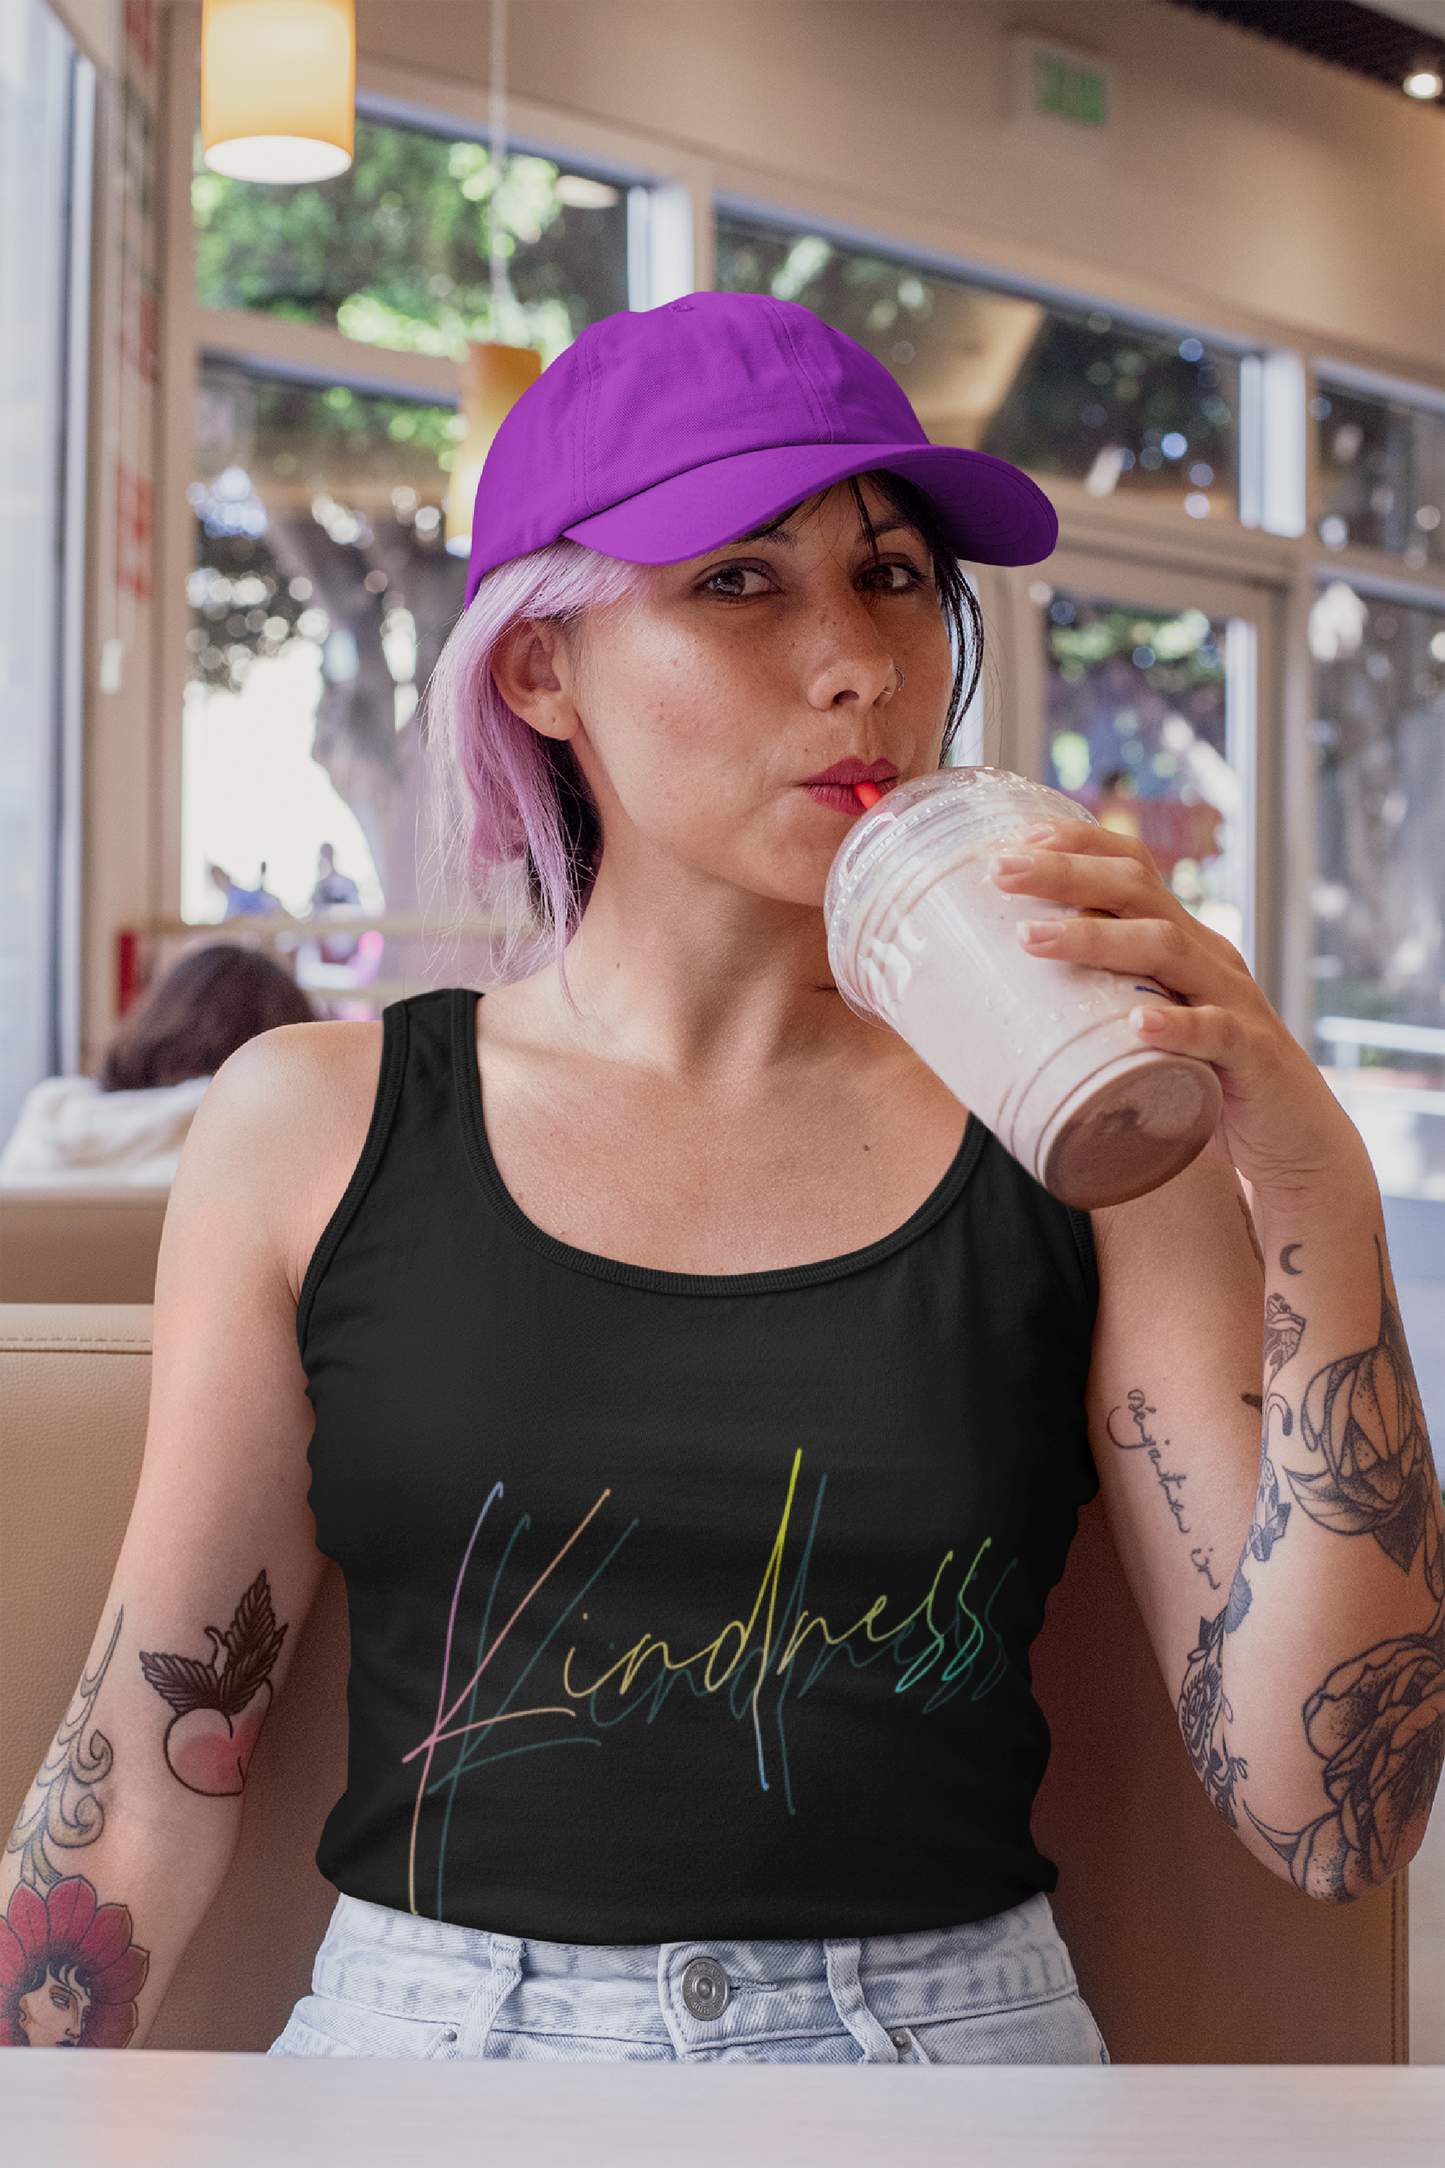 Kindness Tank, Kindness Inspirational Tank, Positive Quote Shirt For Women, Tank That Warm The Heart